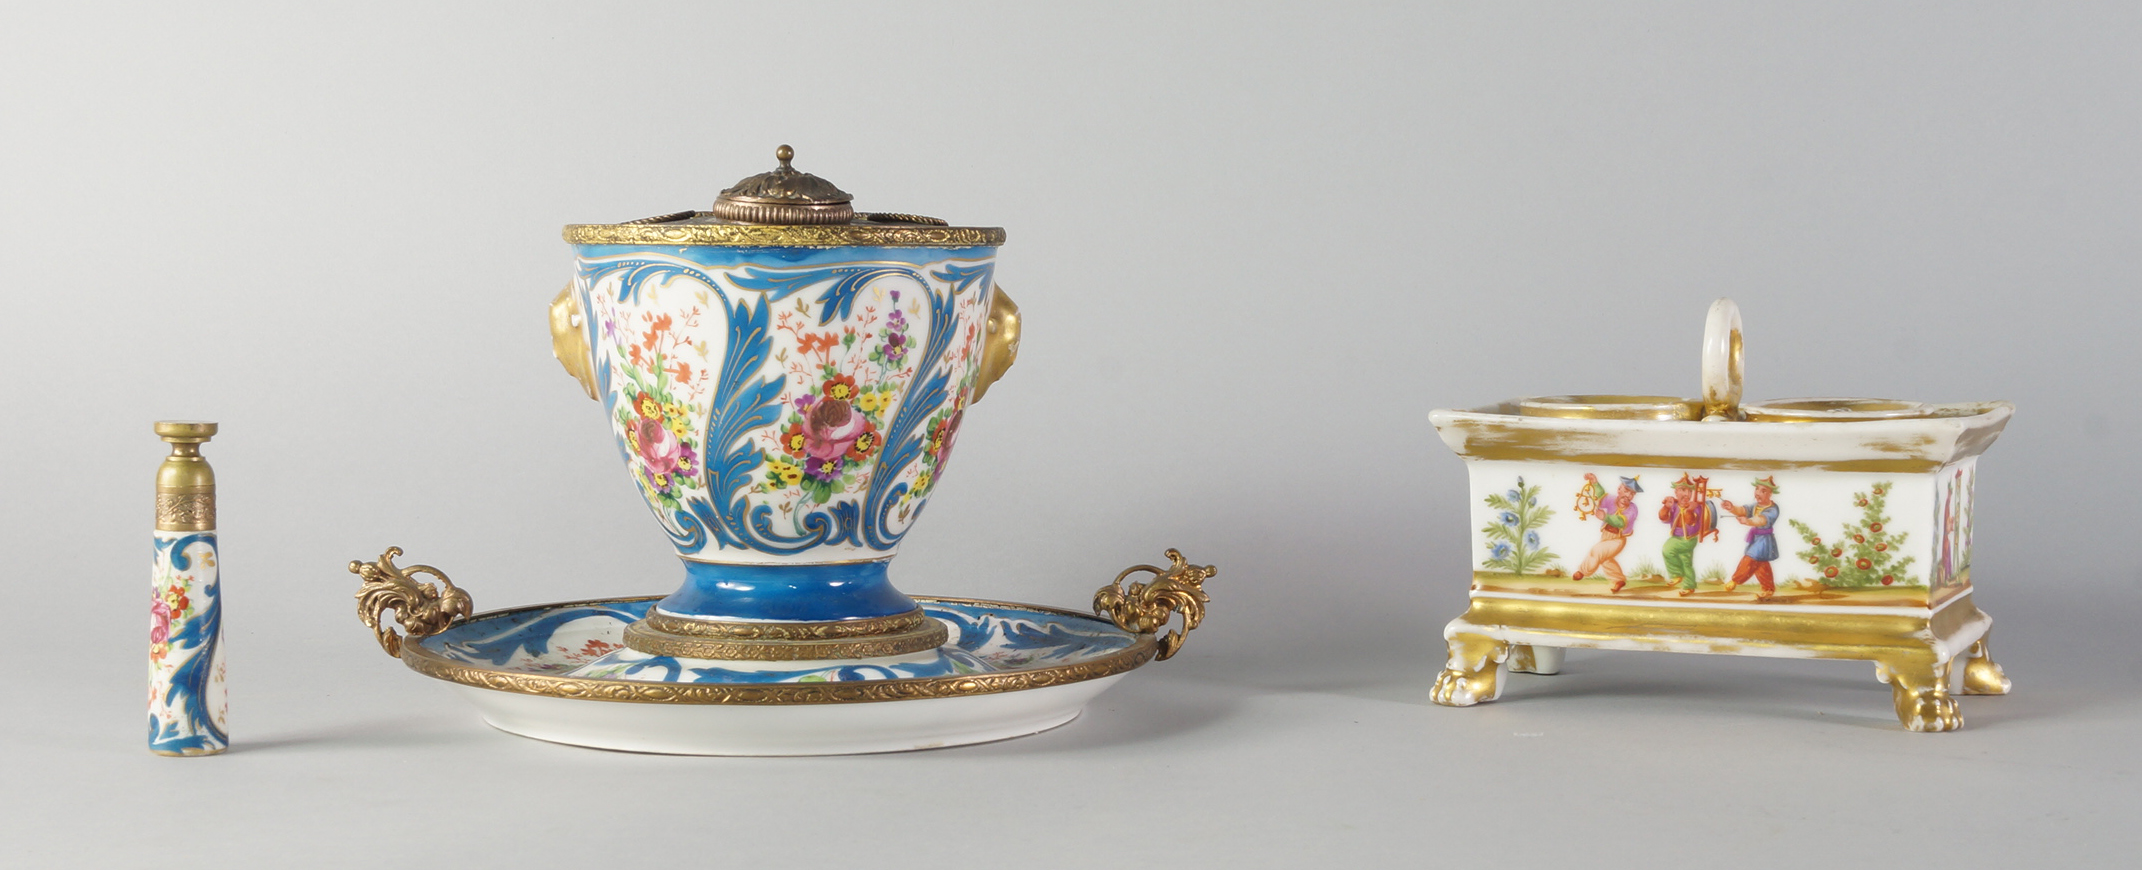 A French Sevres style porcelain inl stand, 19th century, with gilt metal mounts, with matching tray,